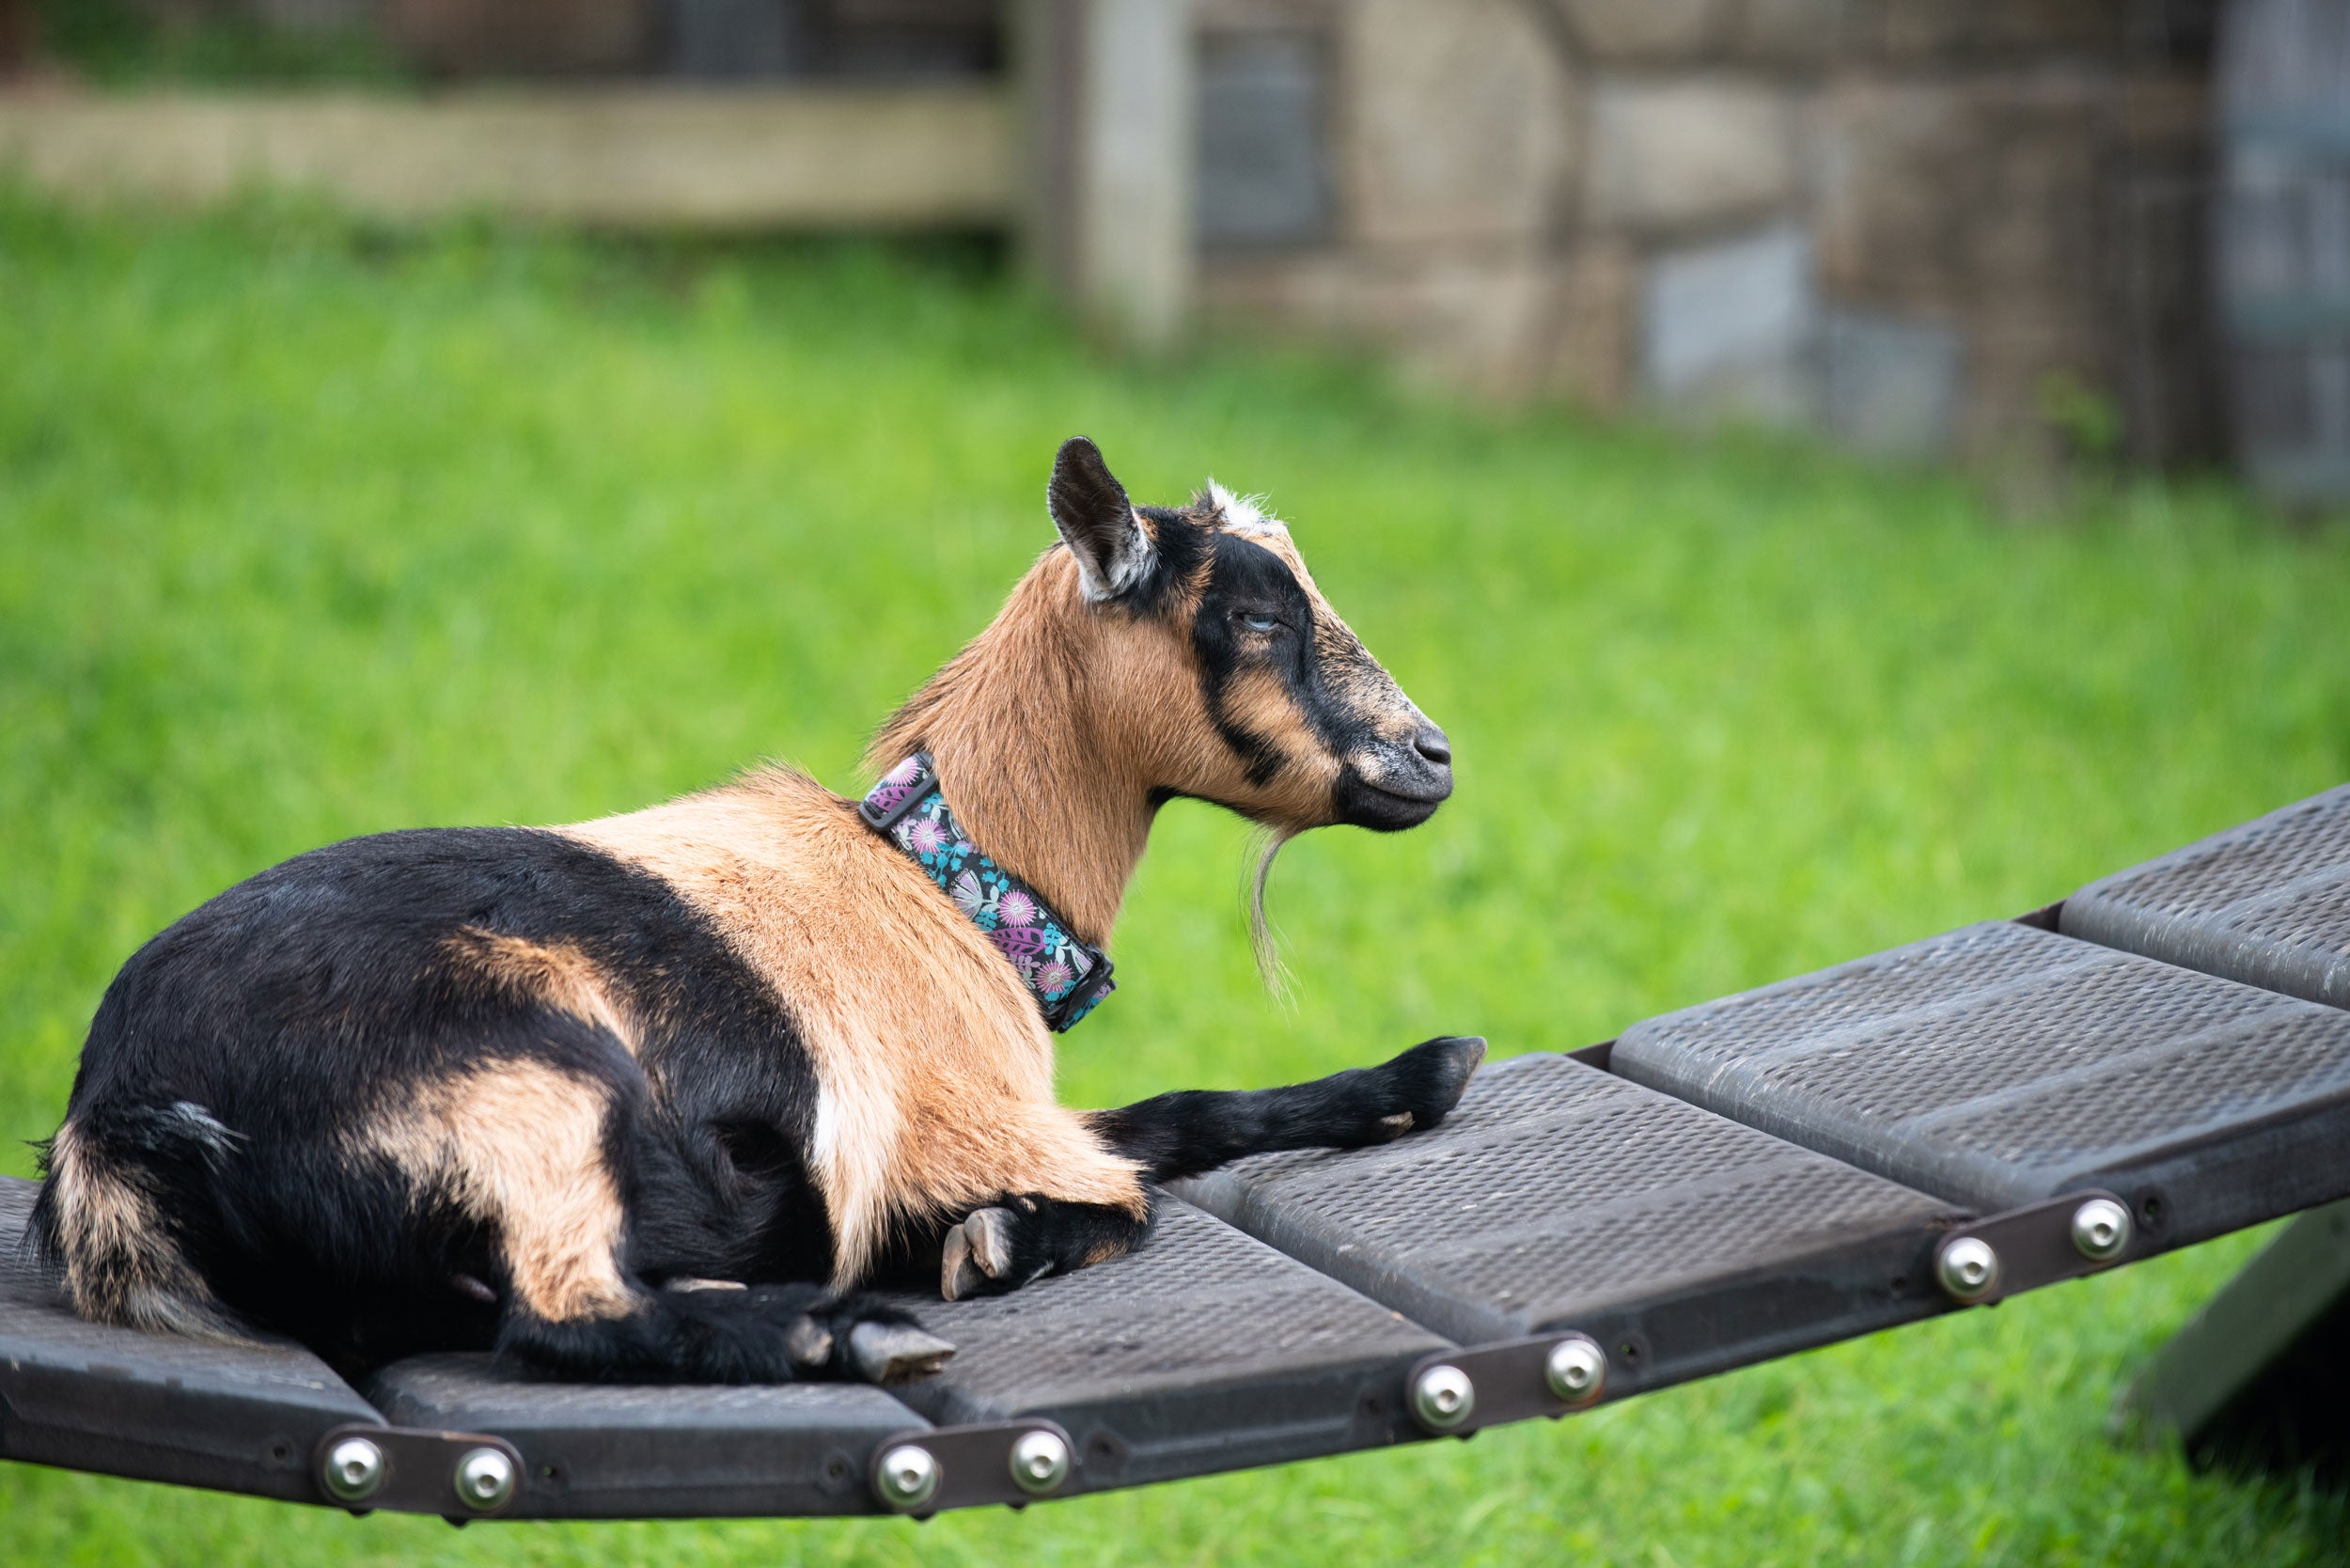 A goat rests on a small bridge in the grassy yard of the Kids' Farm exhibit at the Smithsonian's National Zoo